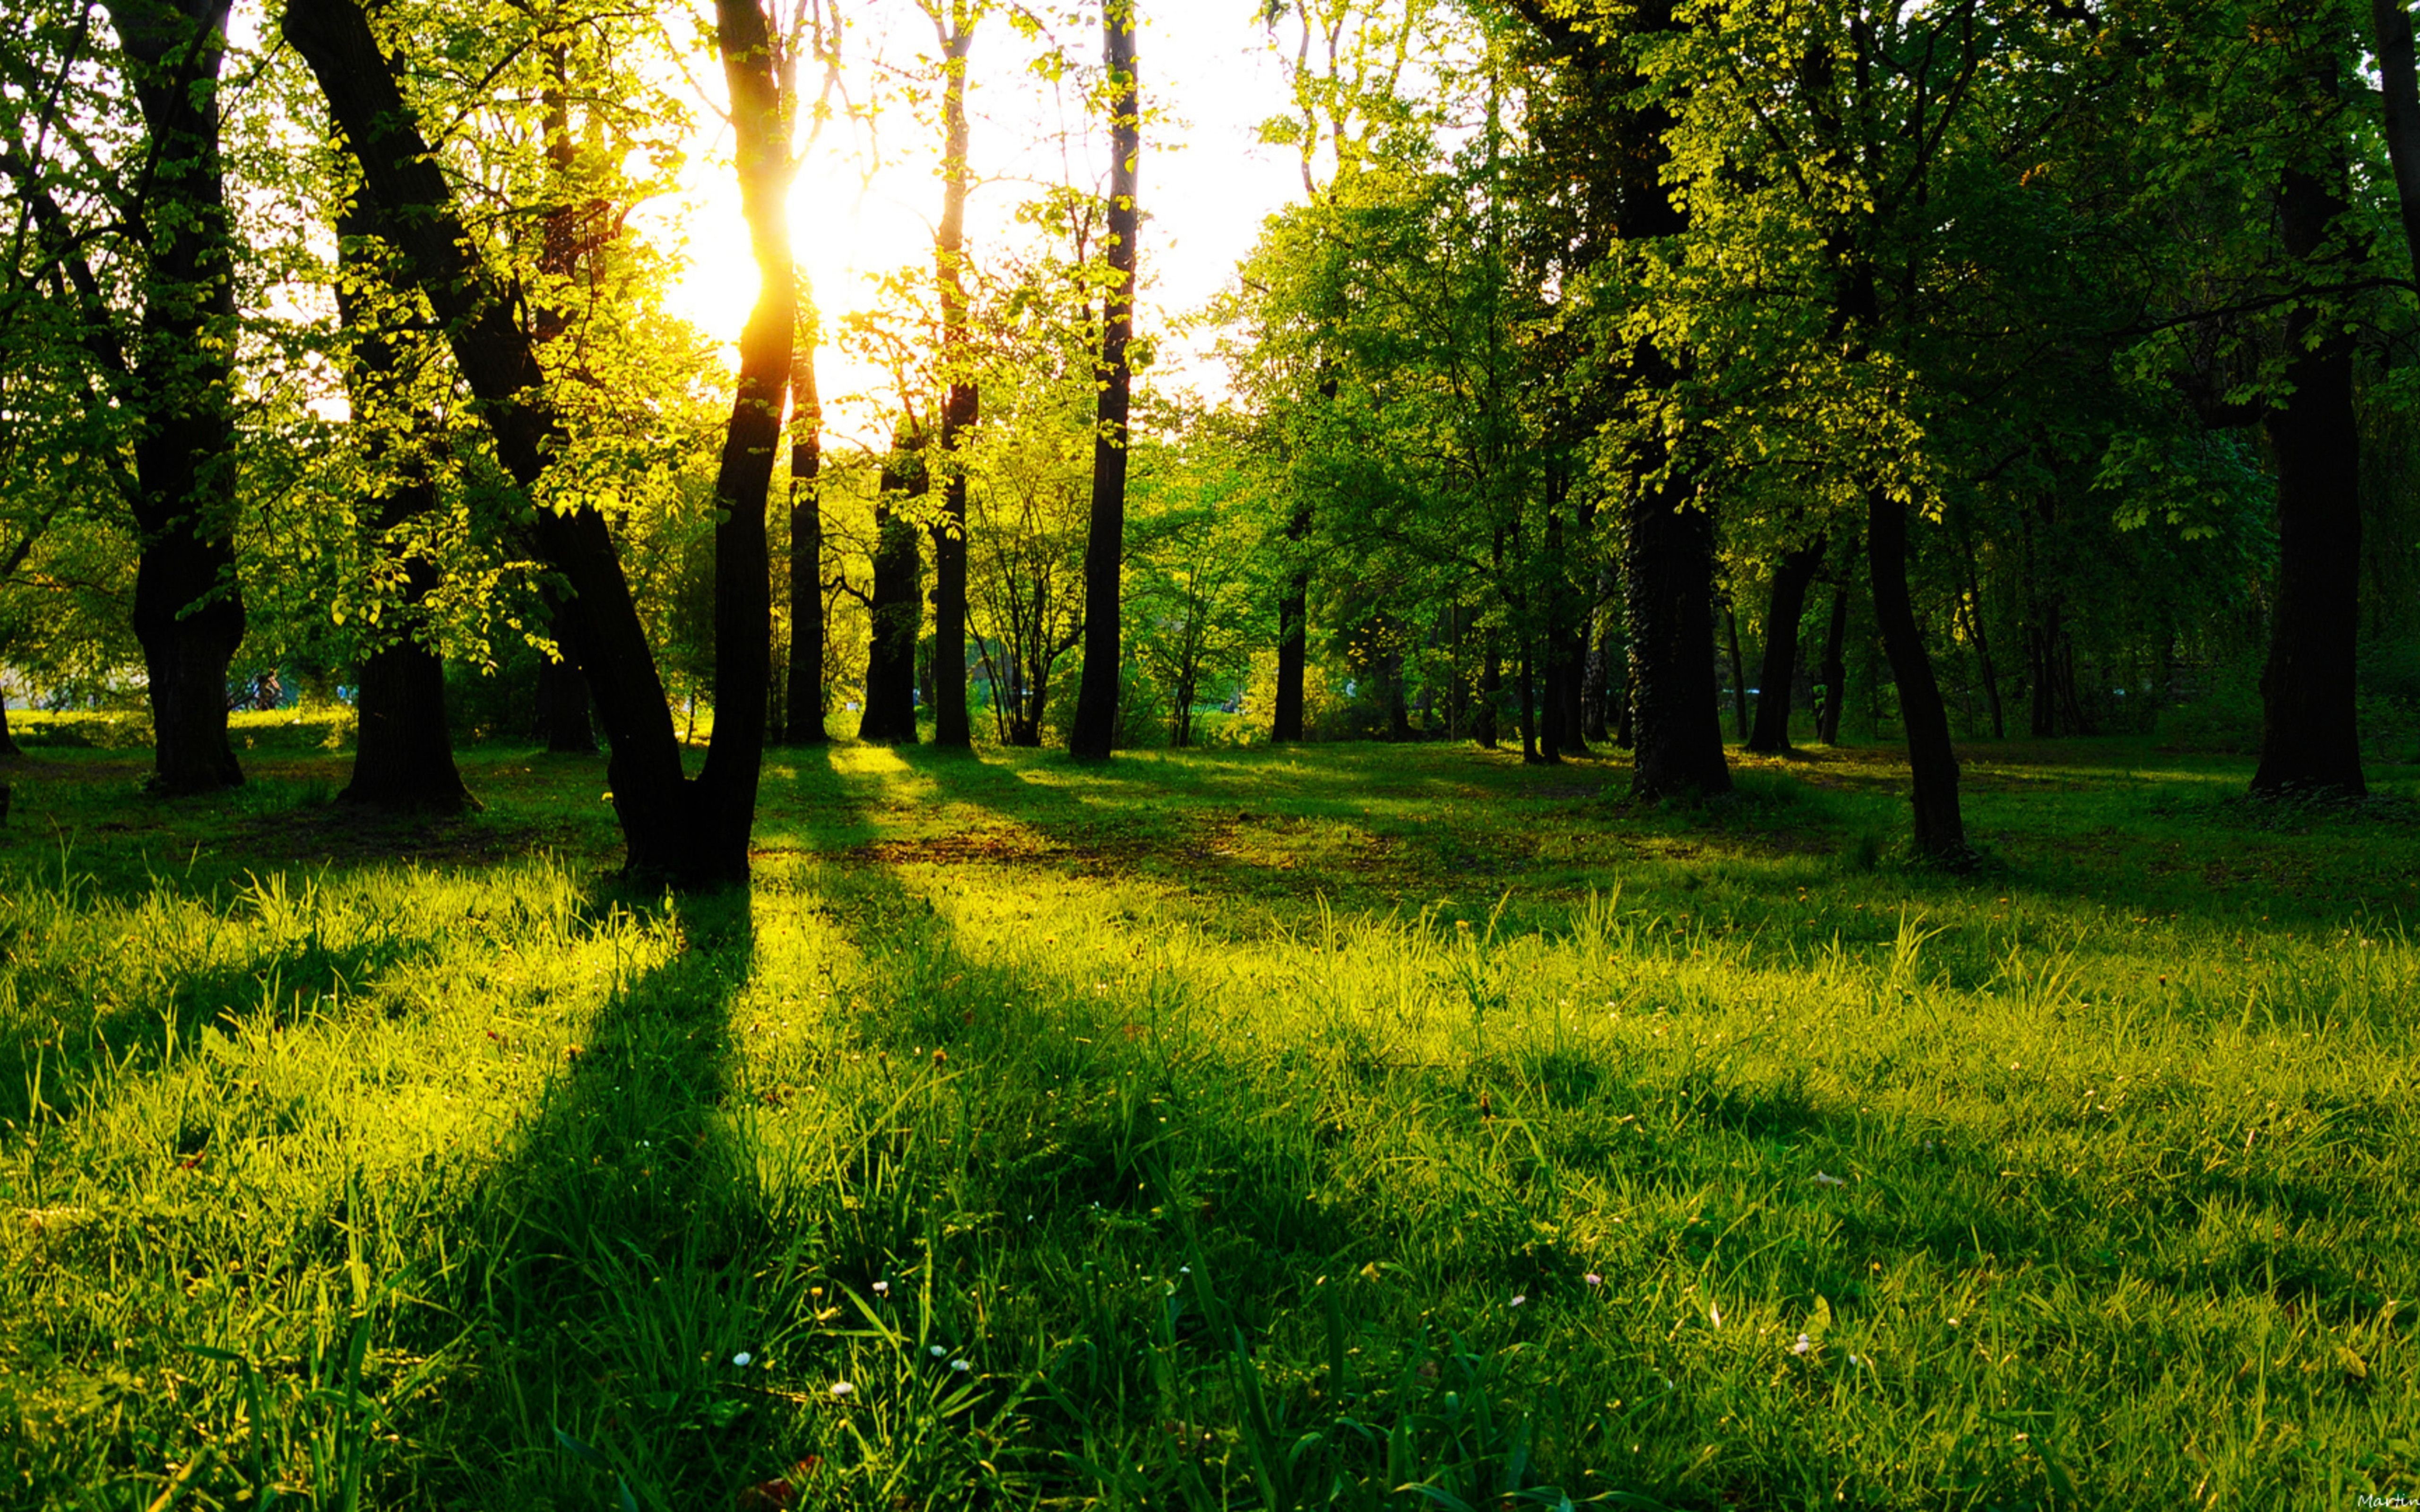 Green area in the woods beautiful nature landscape 5120x3200